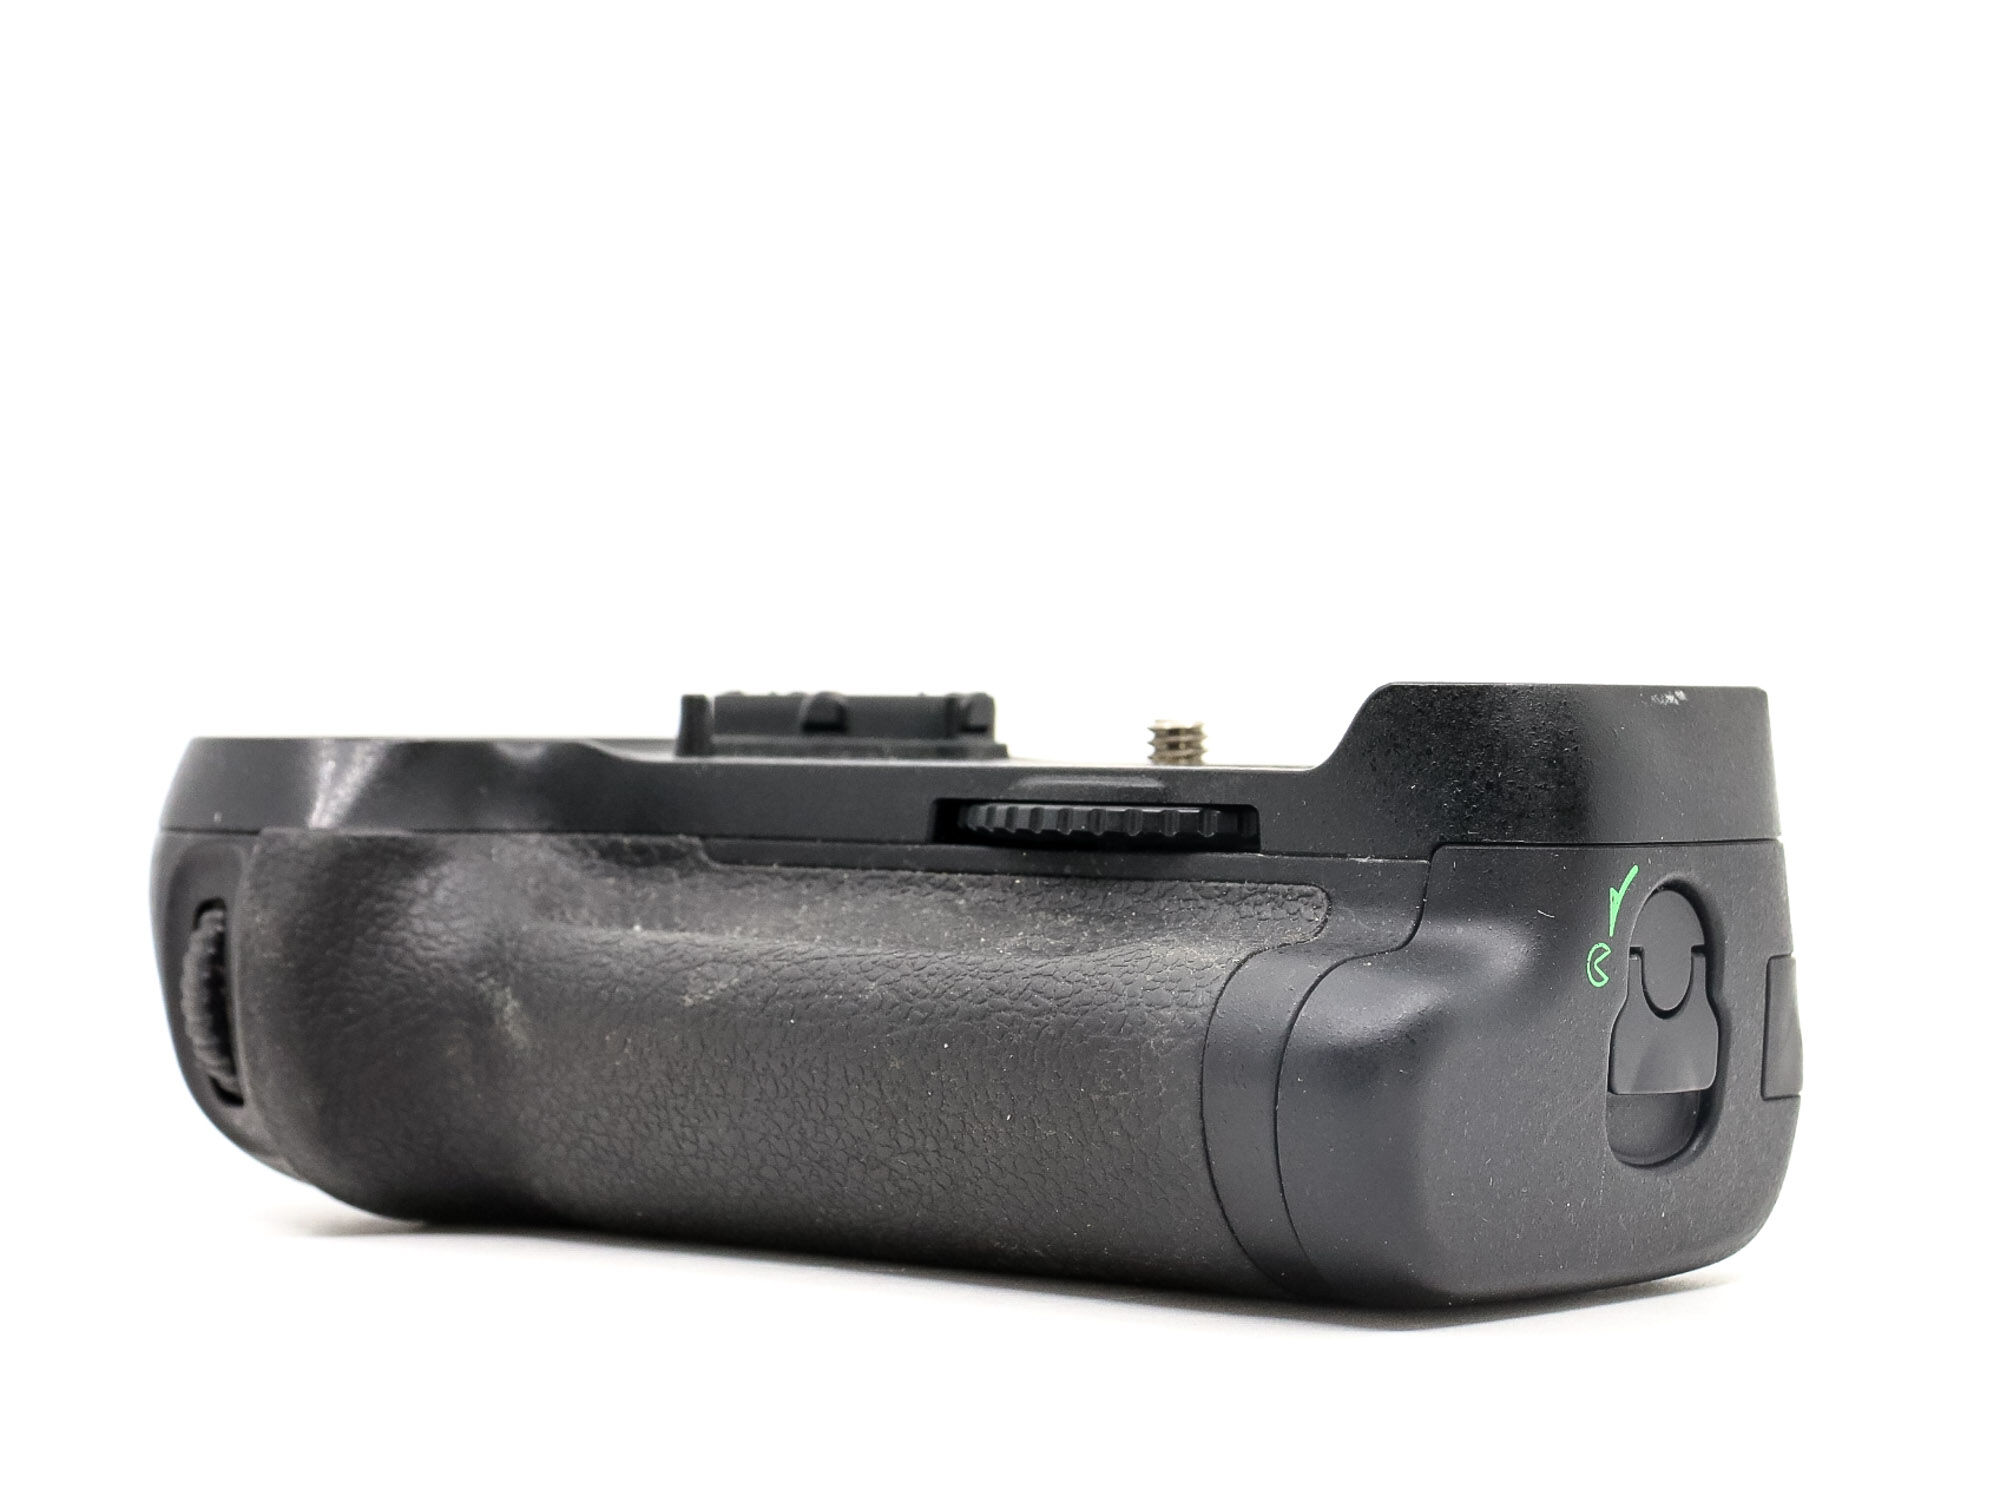 Nikon MB-D12 Battery Grip (Condition: Well Used)